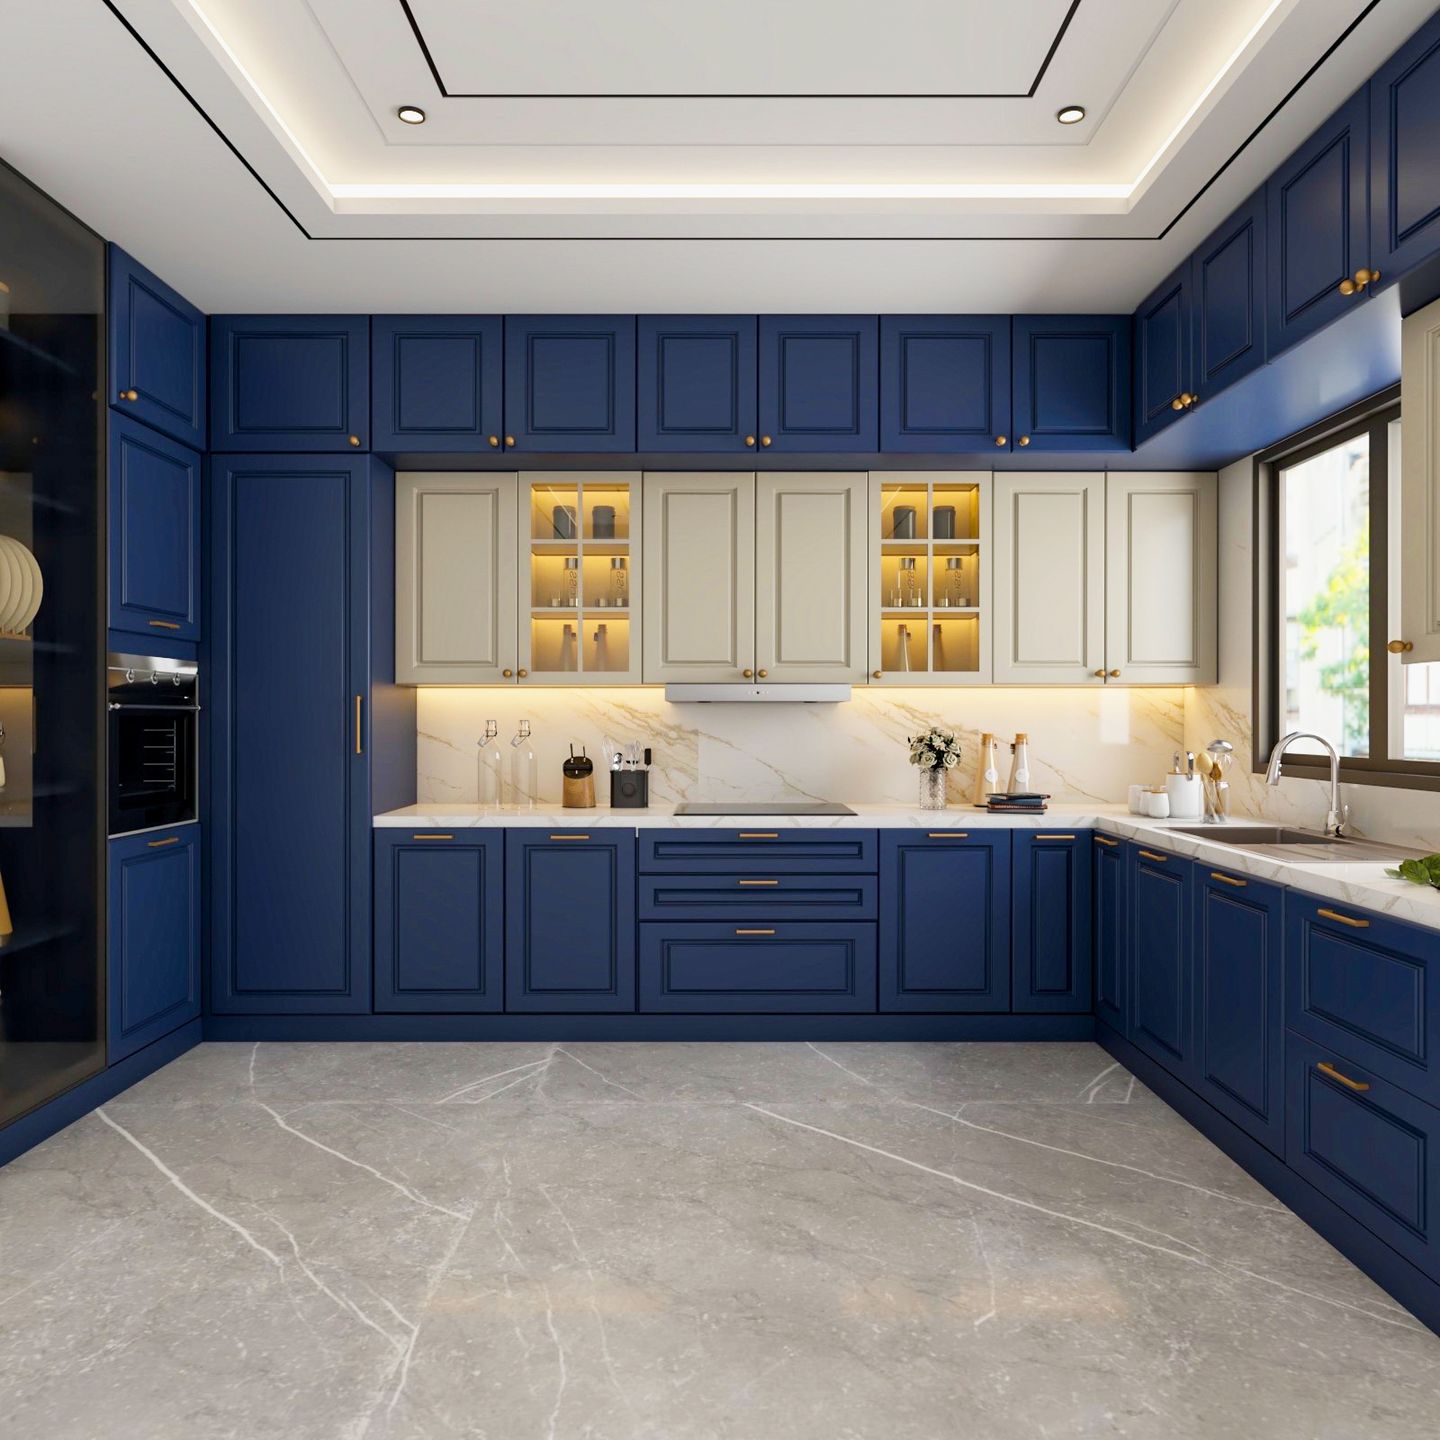 15x14 Ft  Blue And Cream-Toned U-Shaped Kitchen Design With Marble Dado Tiles - Livspace